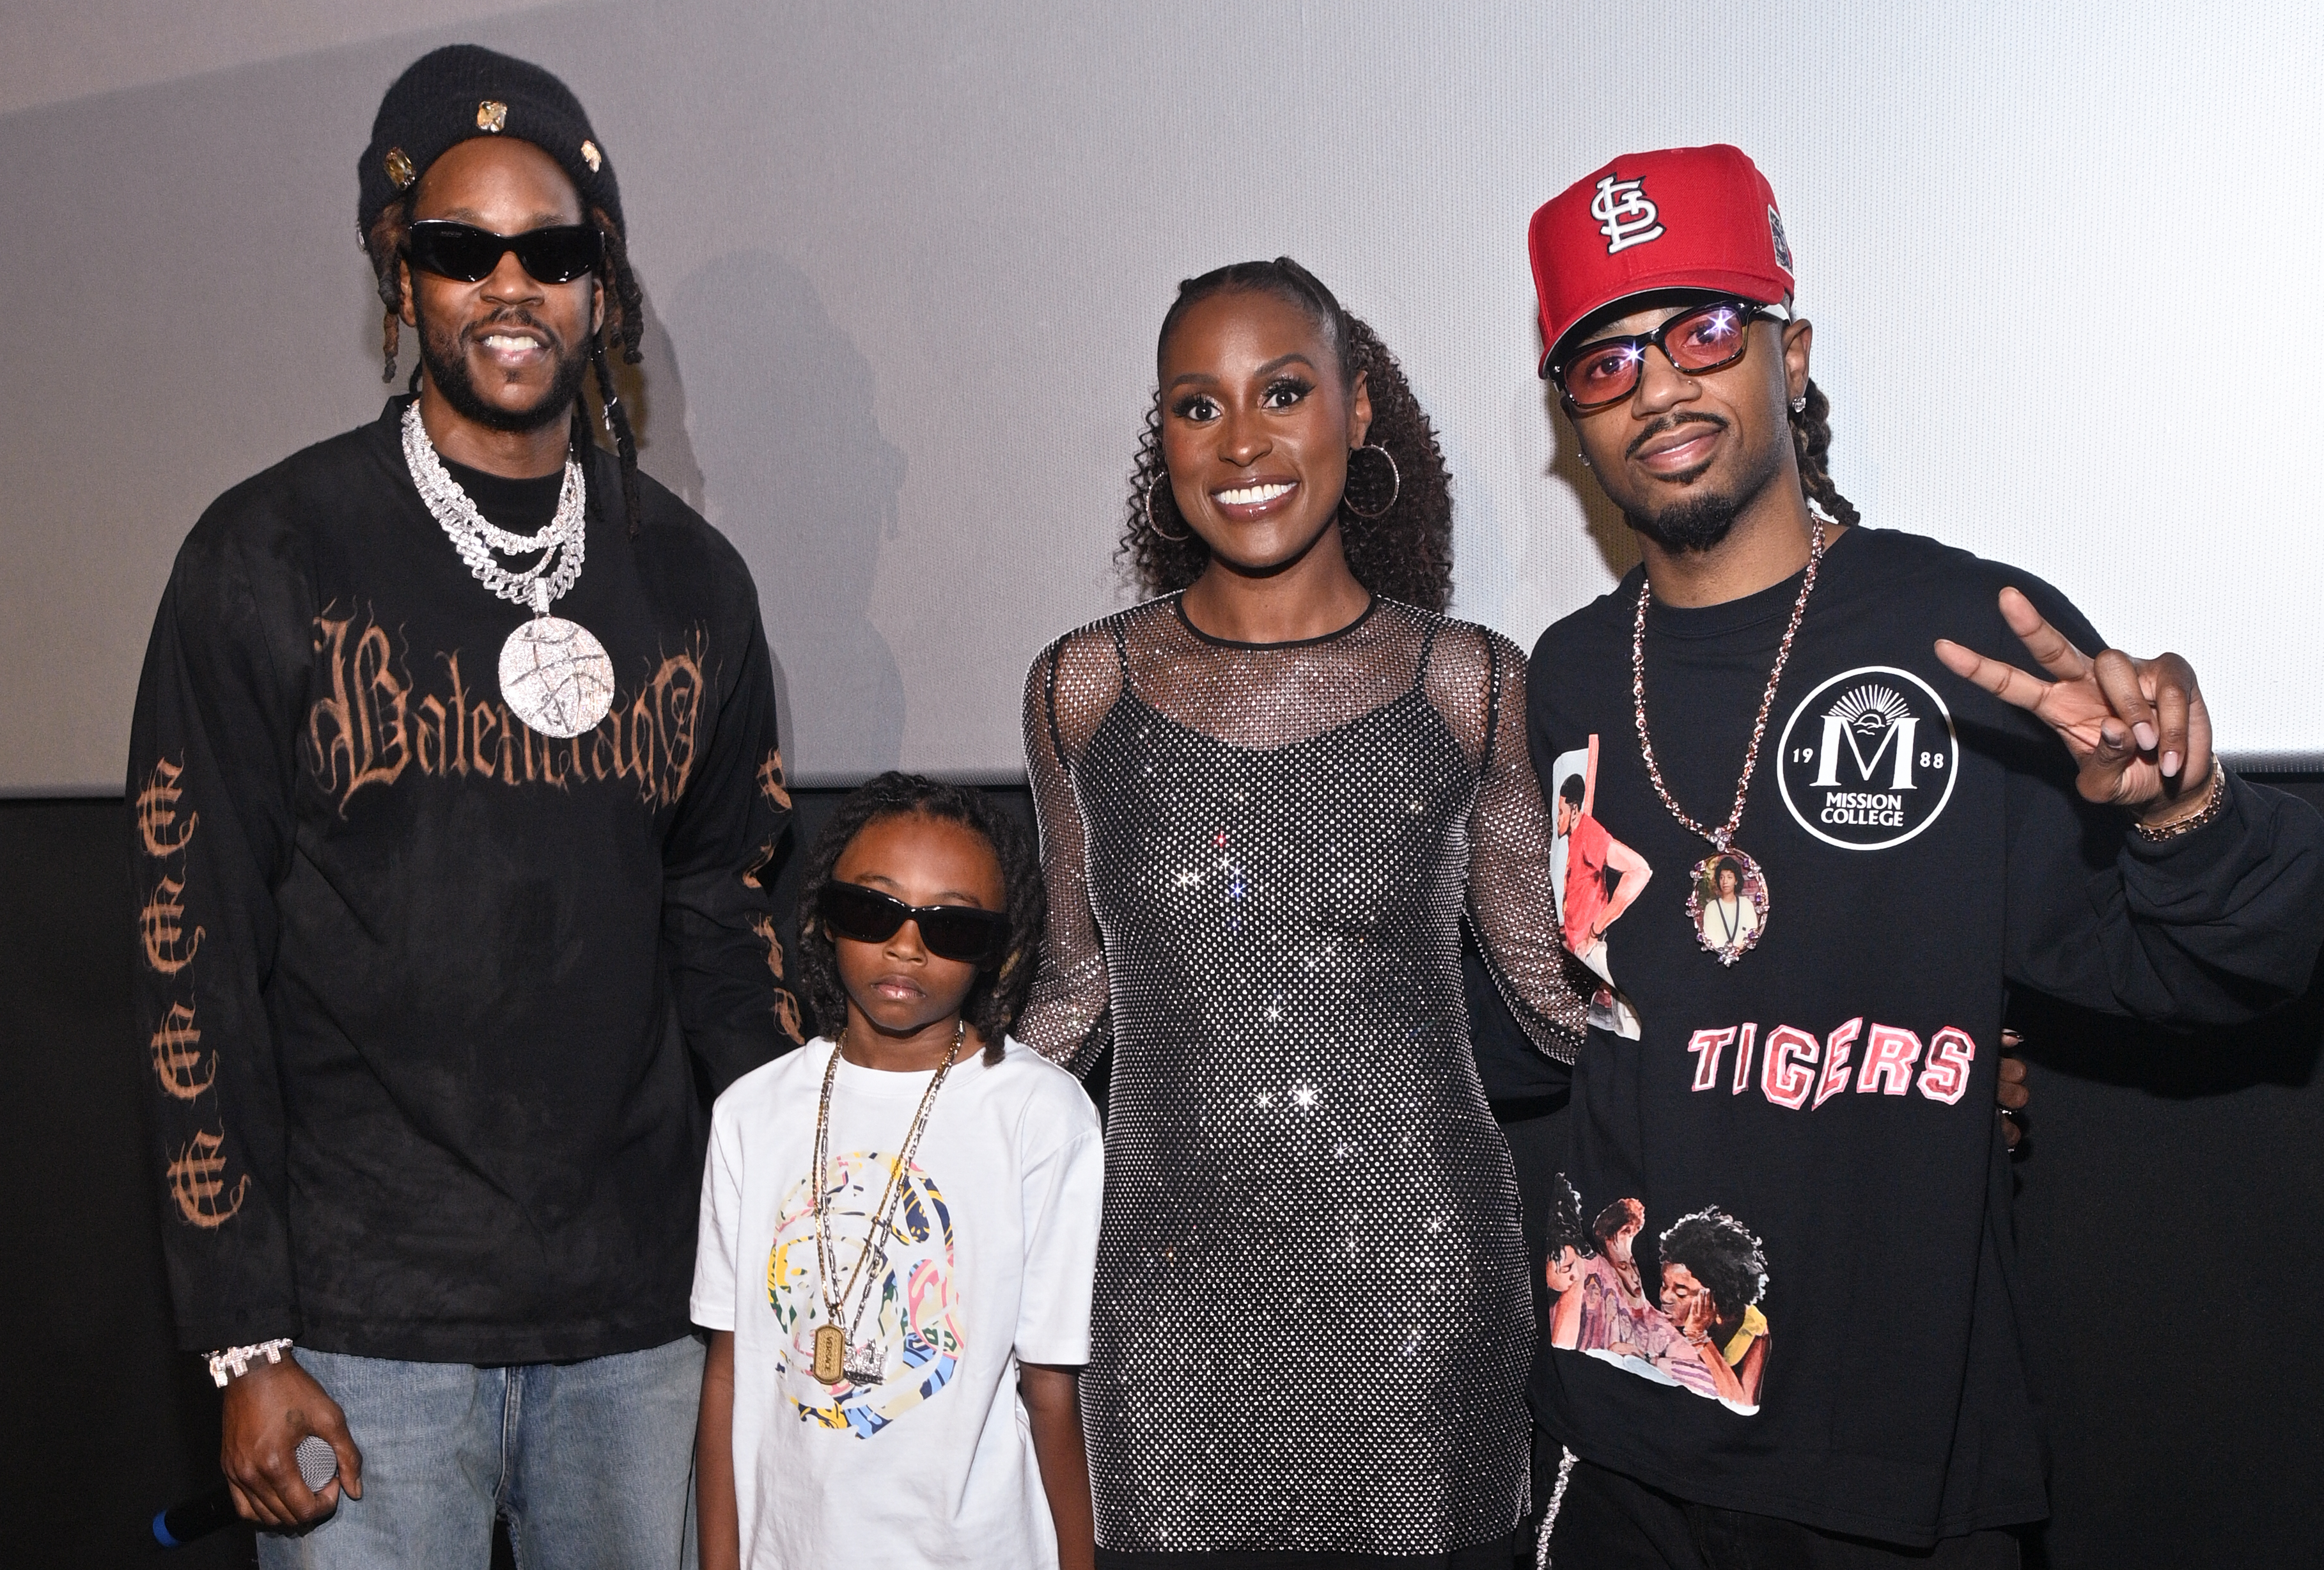 <div>Seen On The Spider-Scene: 2 Chainz, Issa Rae, Metro Boomin, 21 Savage & More Attend ’Across The Spider-Verse’ Screening Event In Atlanta</div>